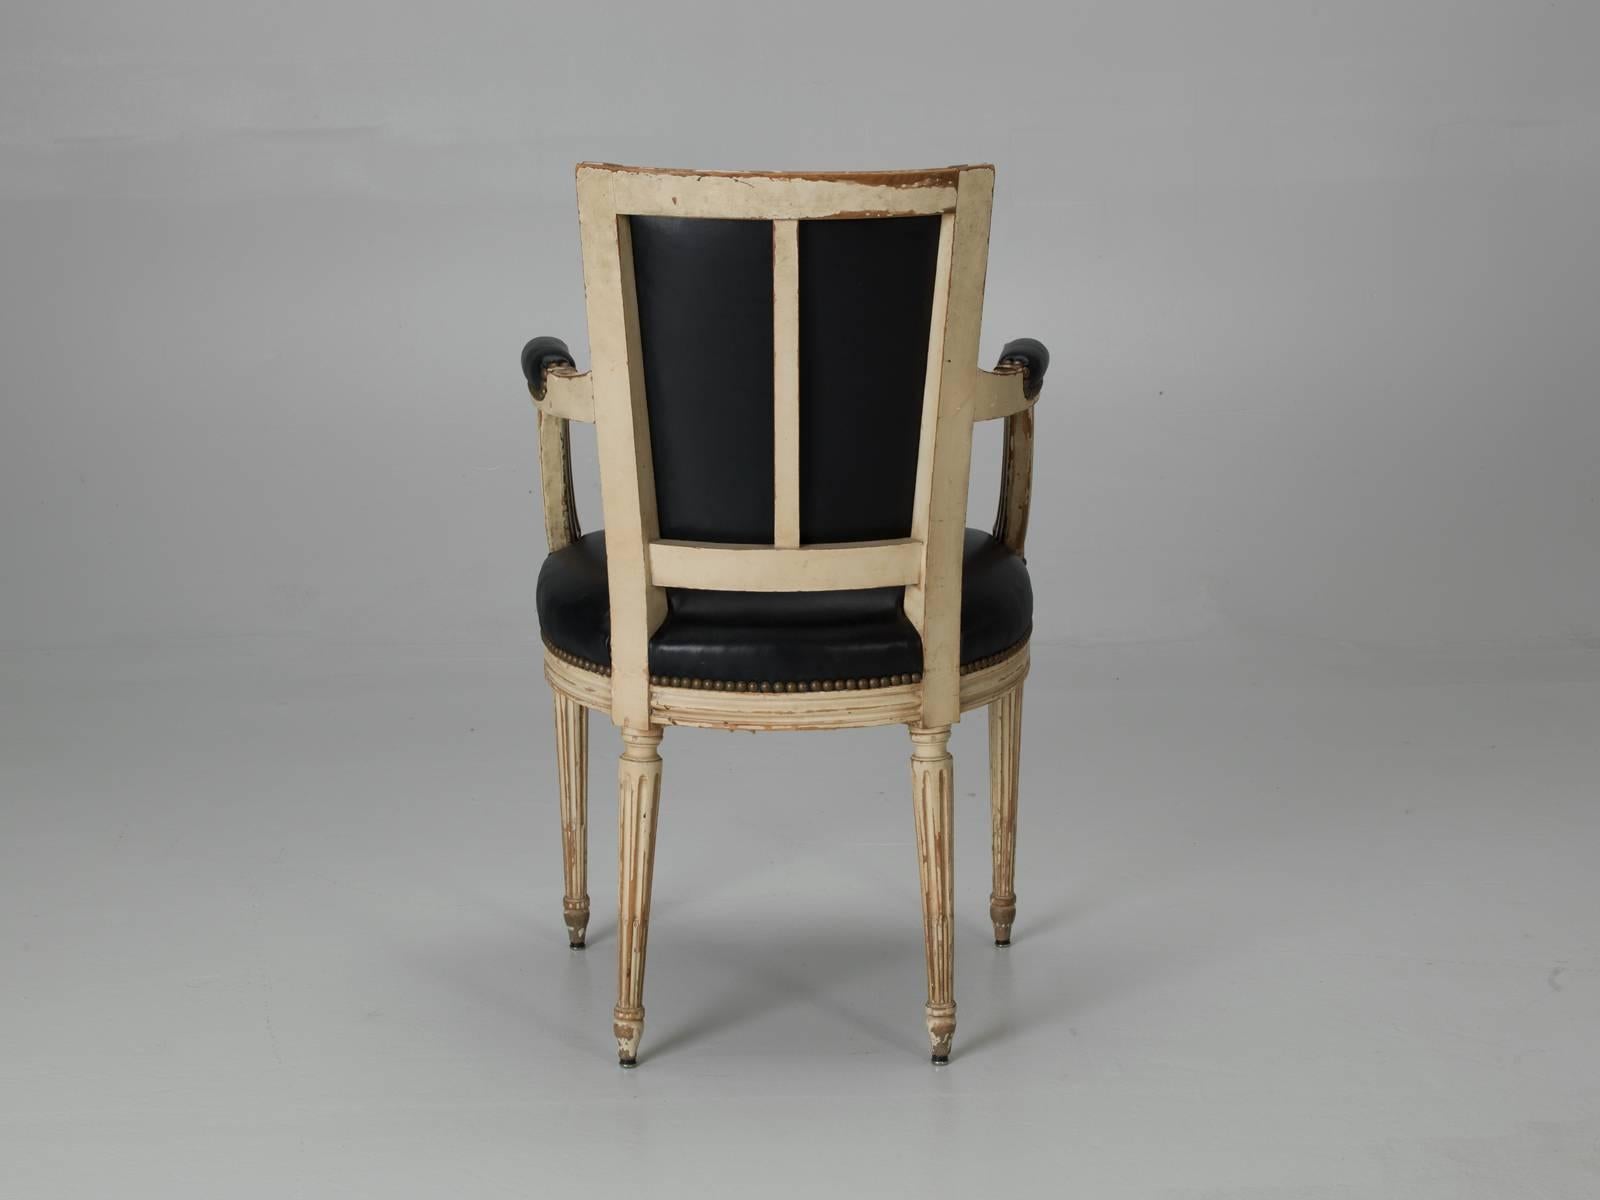 Antique Louis XVI Style French Dining Chairs in Original Paint and Black Leather im Zustand „Hervorragend“ in Chicago, IL